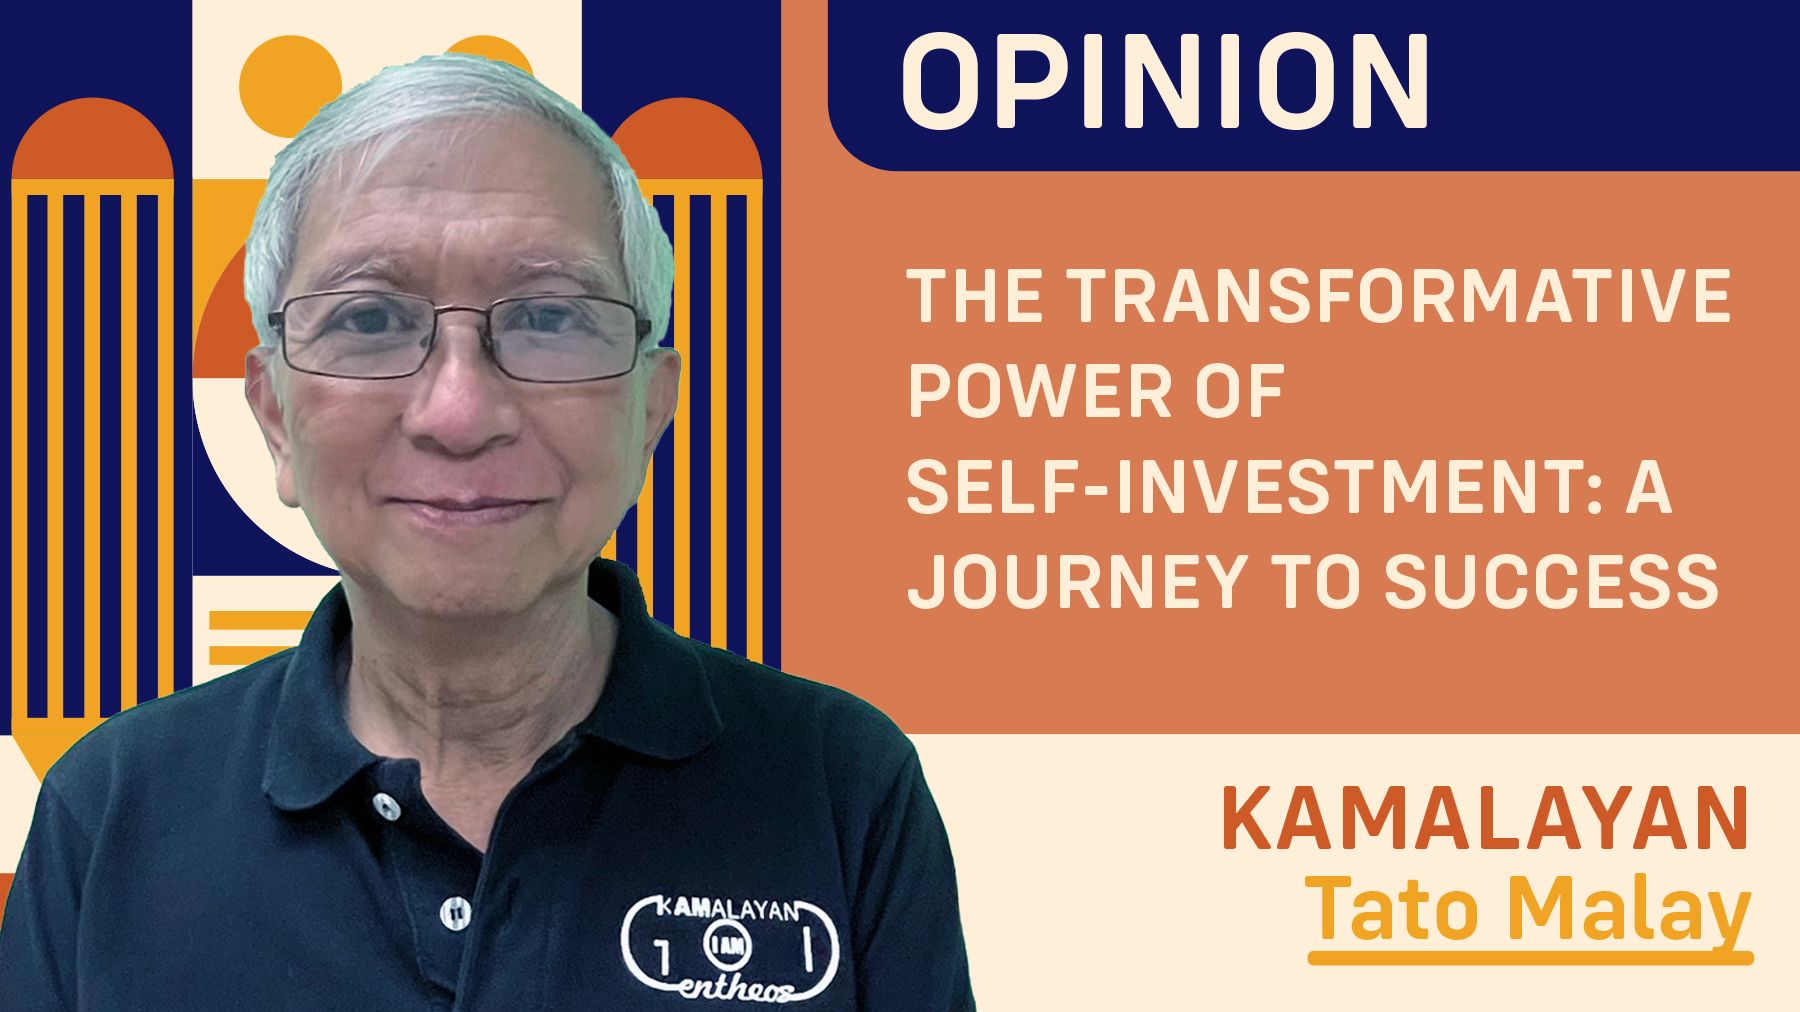 THE TRANSFORMATIVE POWER OF SELF-INVESTMENT: A JOURNEY TO SUCCESS